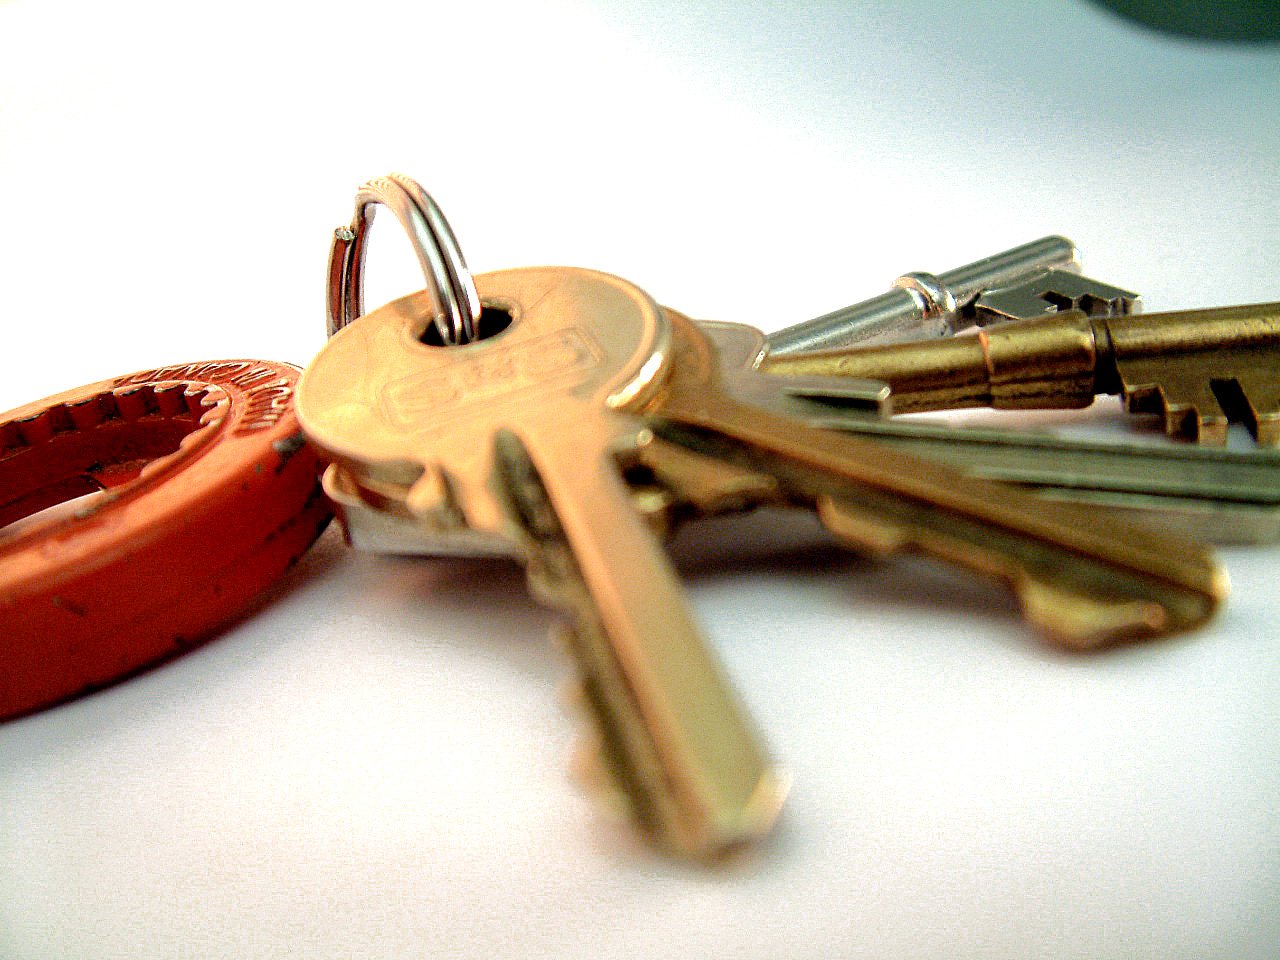 many keys are being attached to each other